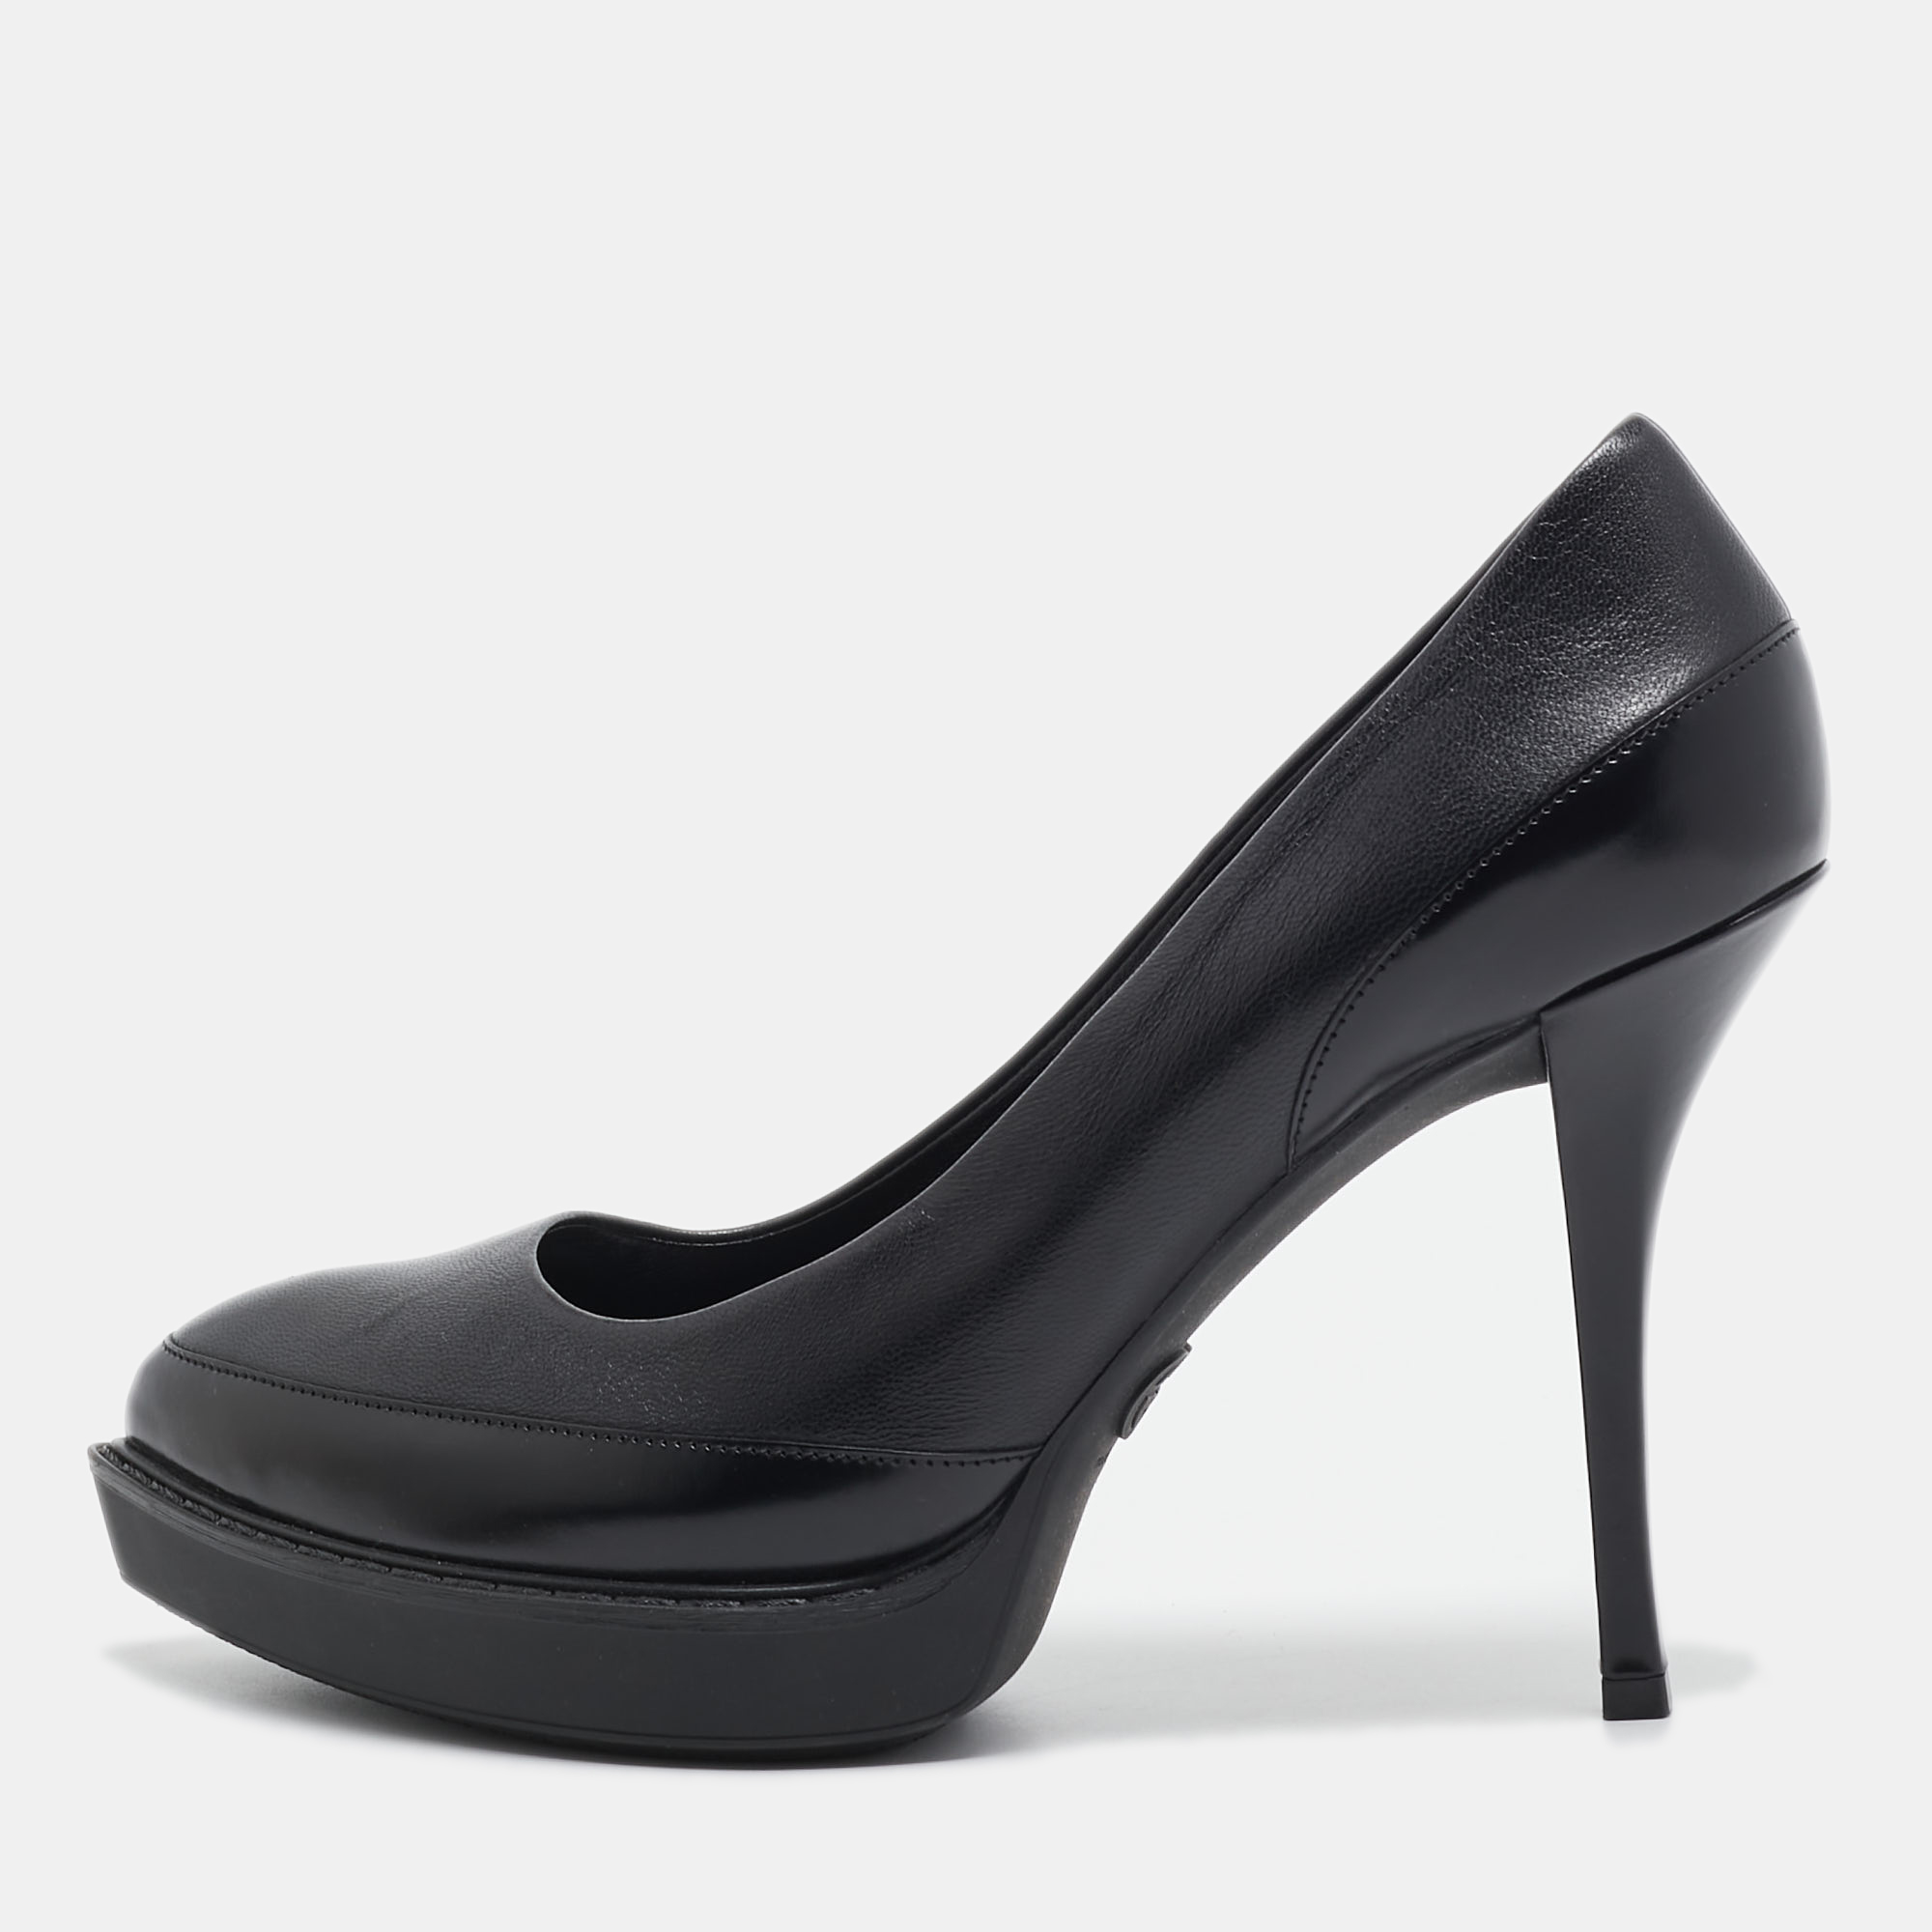 Pre-owned Gucci Black Leather Pointed Toe Pumps Size 38